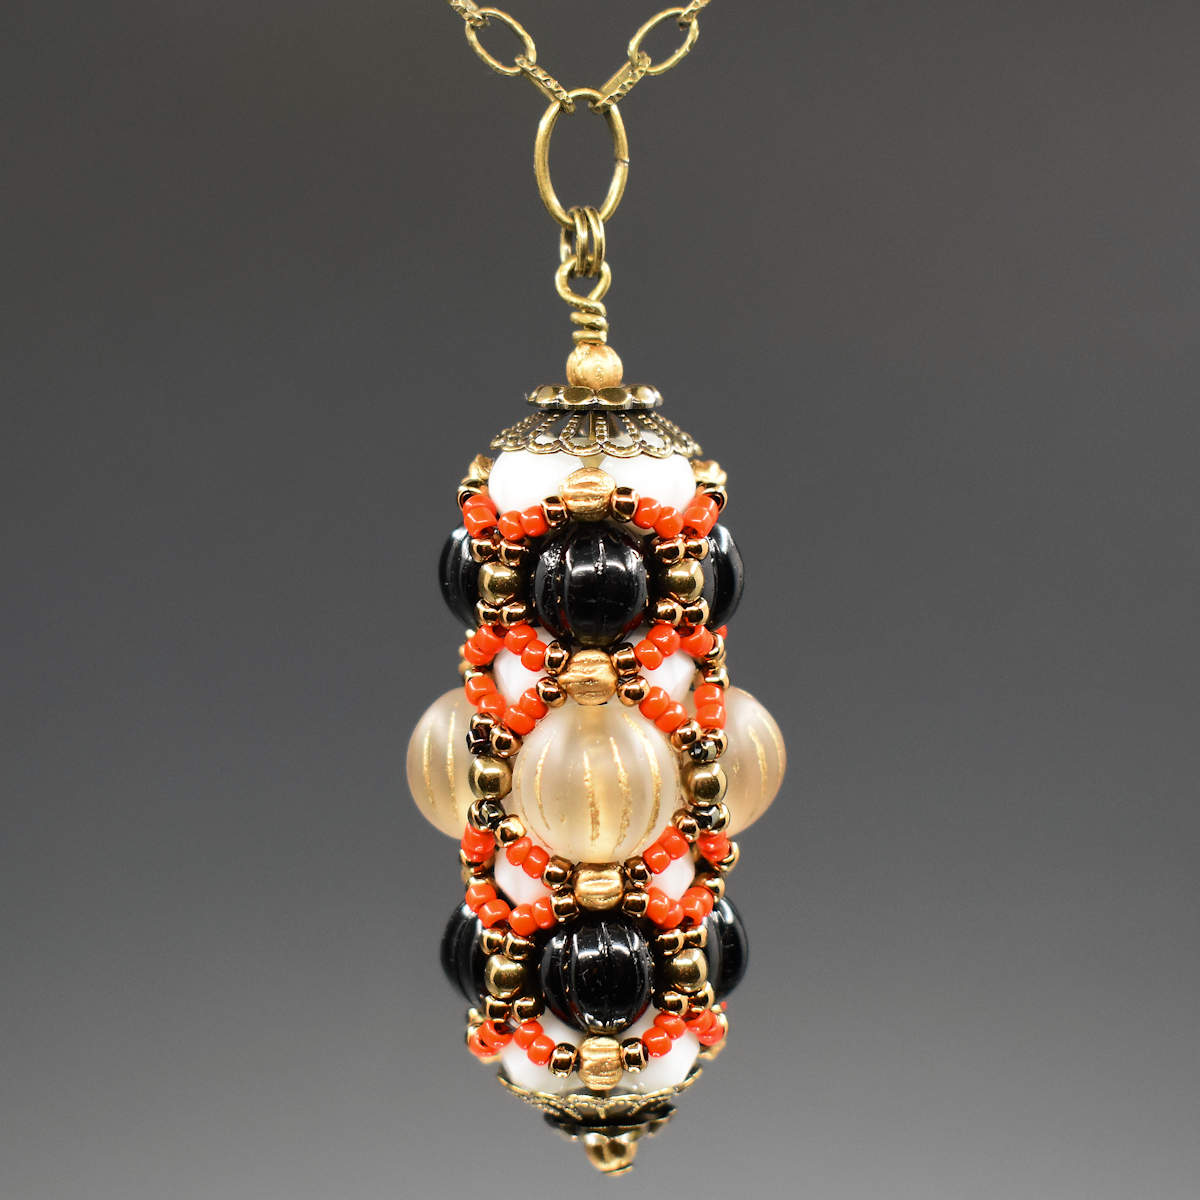 A black and cream pendant with coral accents hangs on a golden chain against a gray background. The pendant has a wider center row with frosted clear beads that have vertical gold stripes. The outer rows are both ridged black rounds. Smaller white beads helping form the structure are mostly hidden beneath the coral and gold seed bead netting that overlays the whole pendant. 